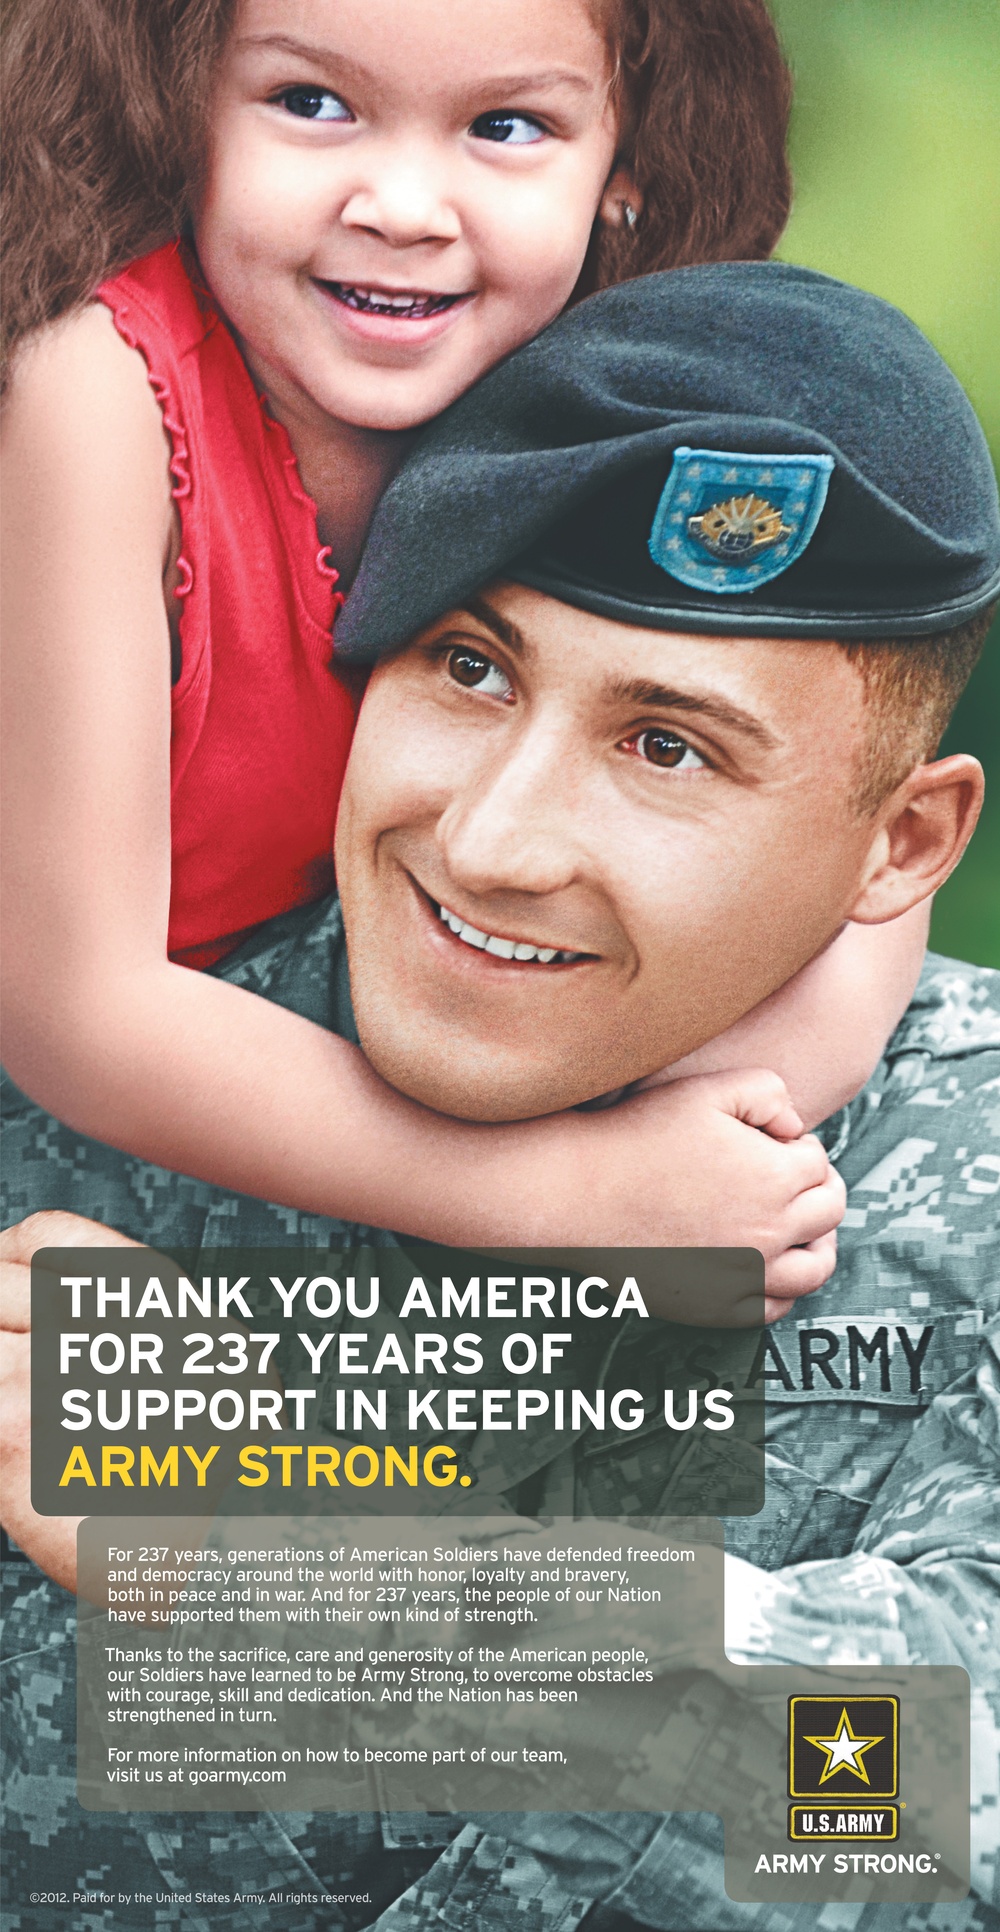 Thank you America for 237 years of support in keeping us Army Strong